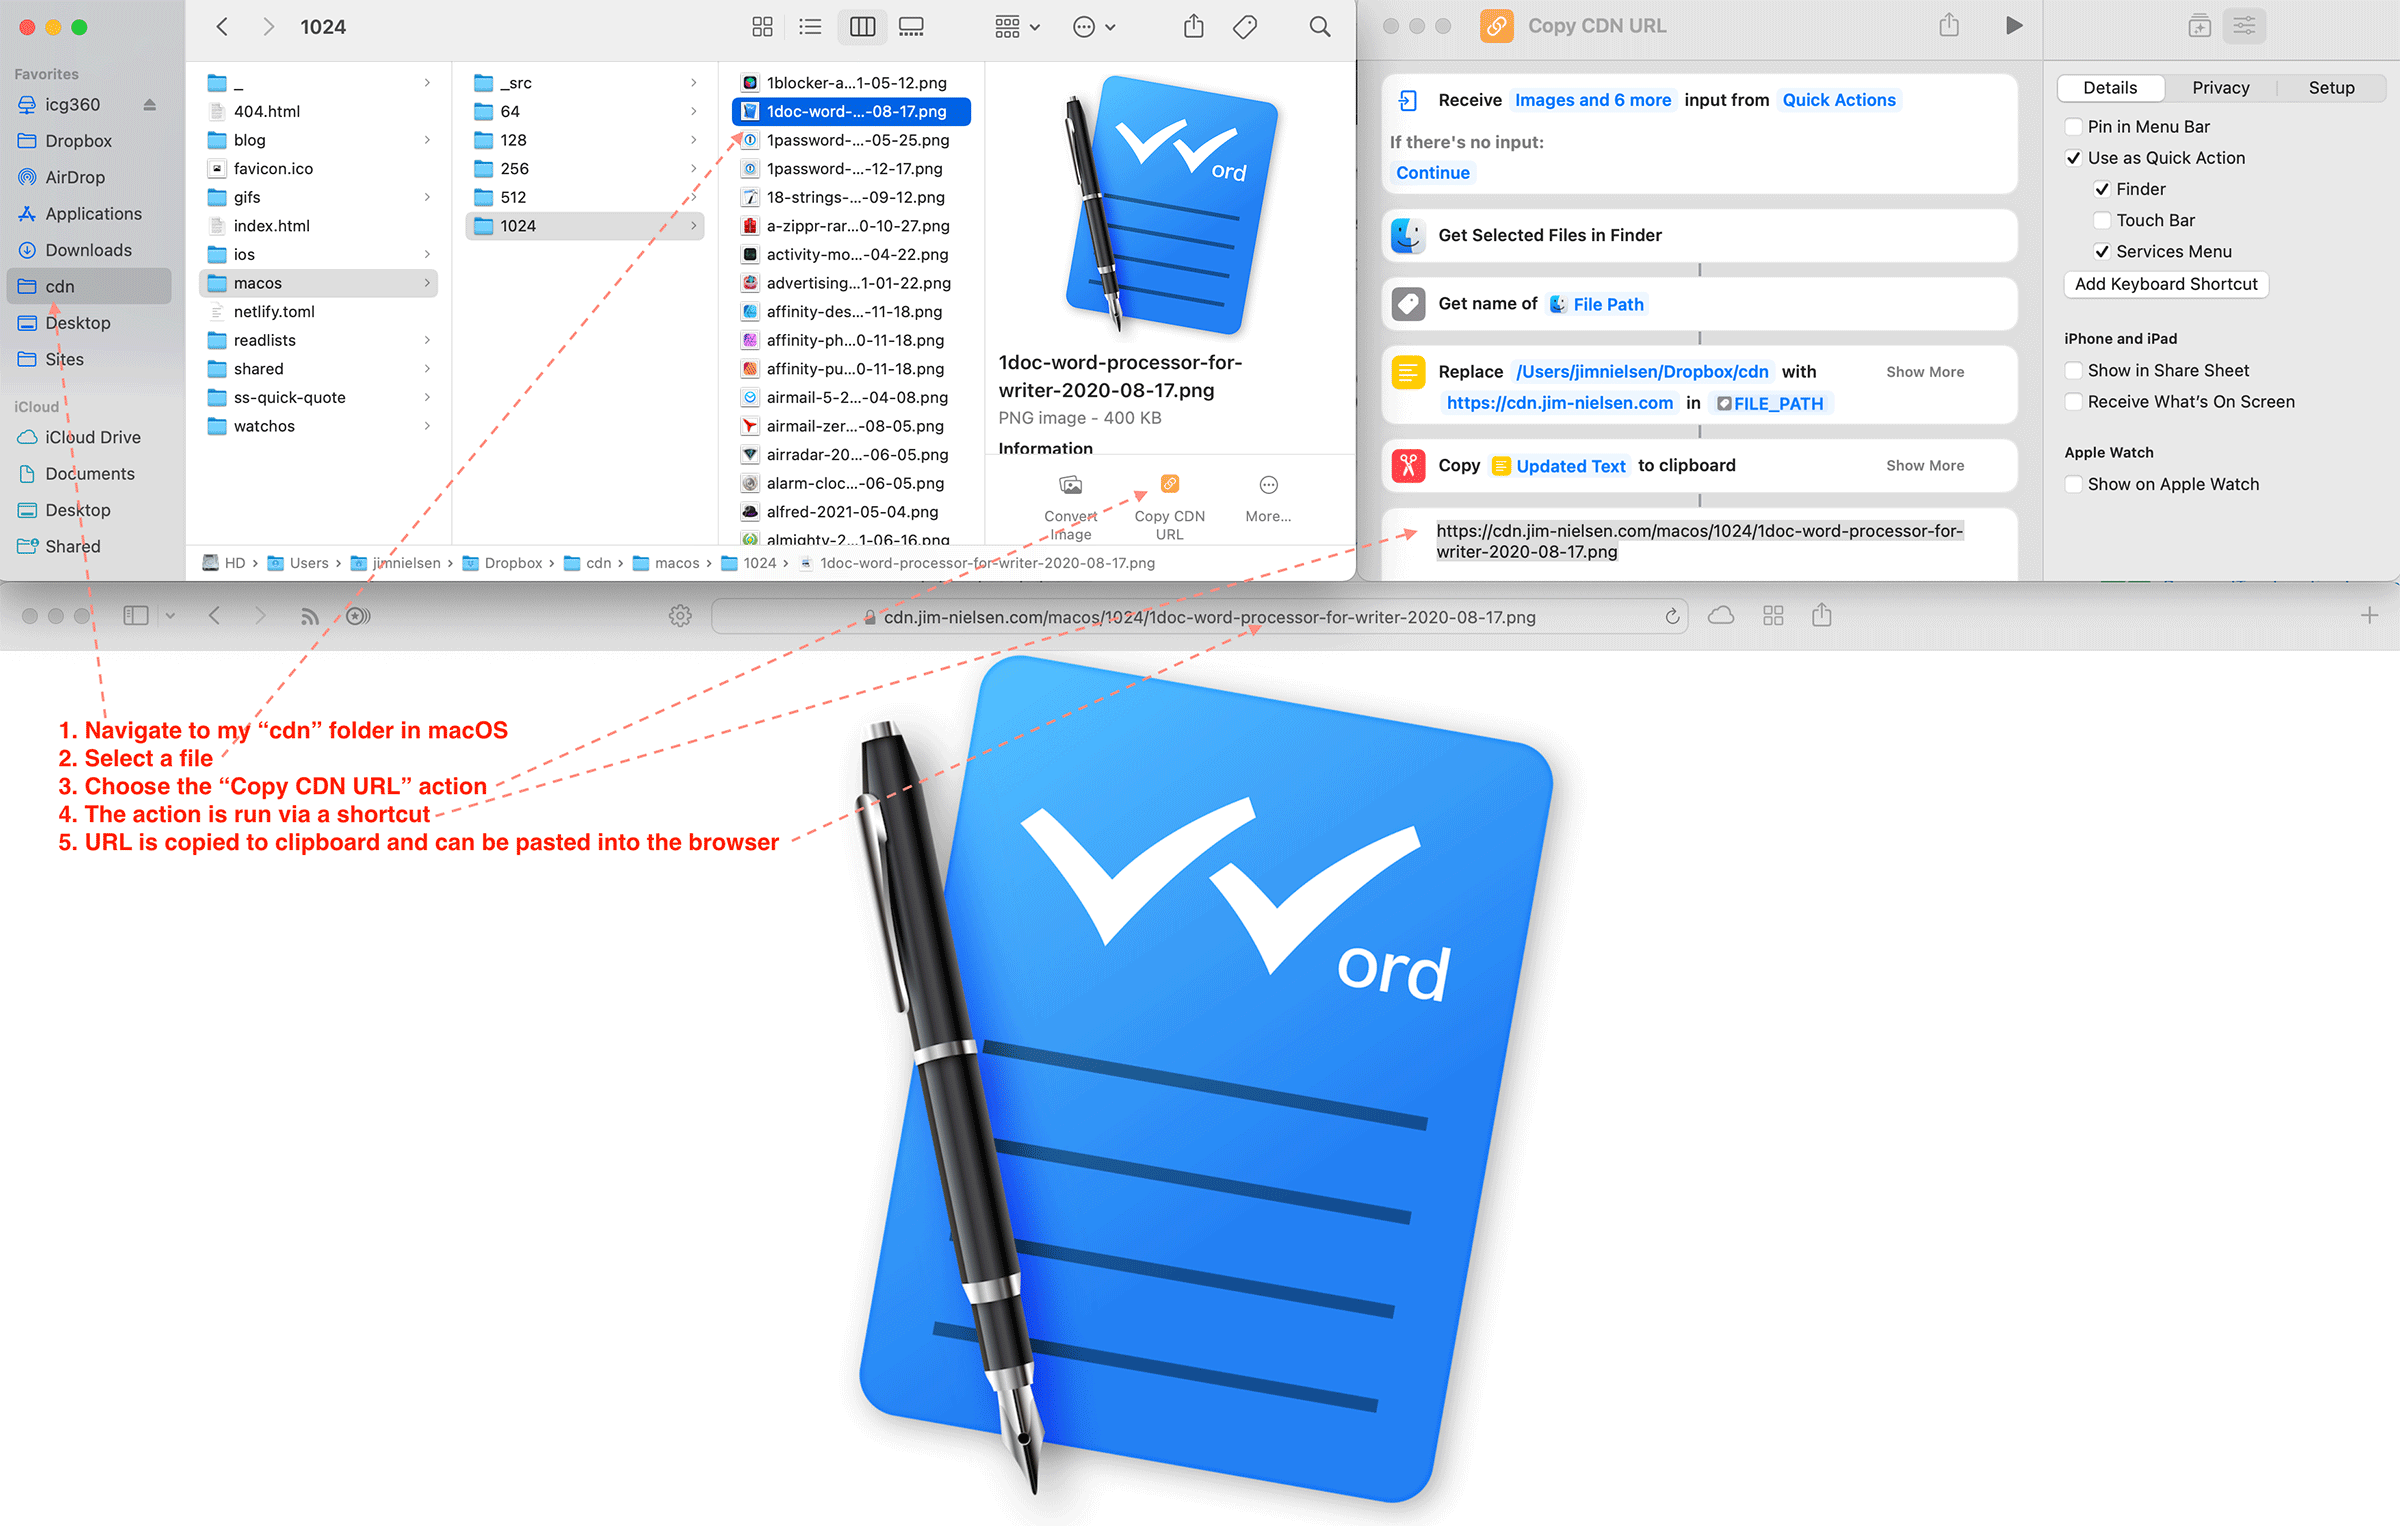 Screenshot of three apps on macOS: 1) Finder, 2) Shortcuts, and 3) Safari. Text is overlaid on the image to show the connection between each app in copying the path of a file on disk to a public-facing URL in the browser.